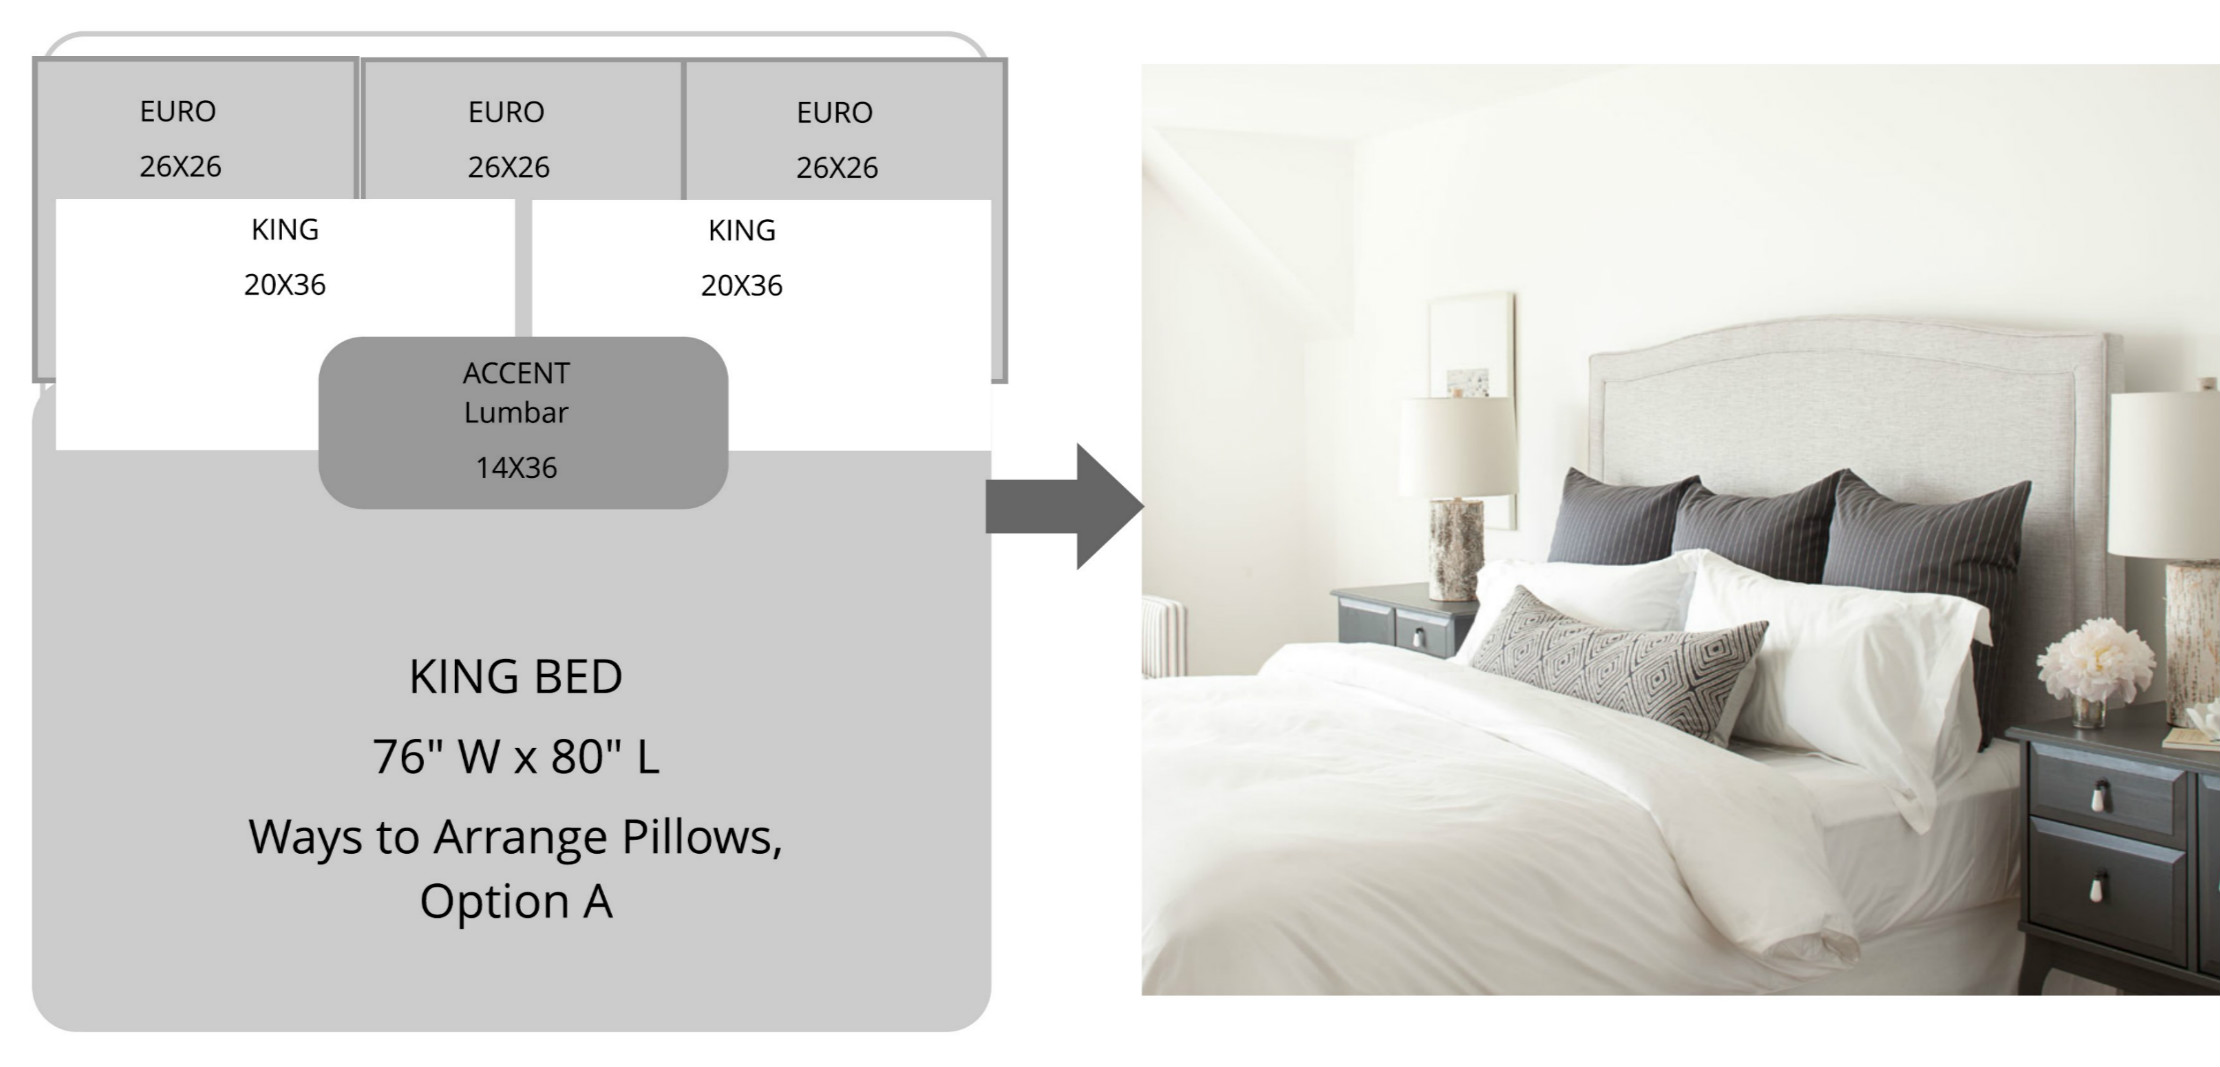 How to Arrange Pillows On Your Bed - The Anastasia Co